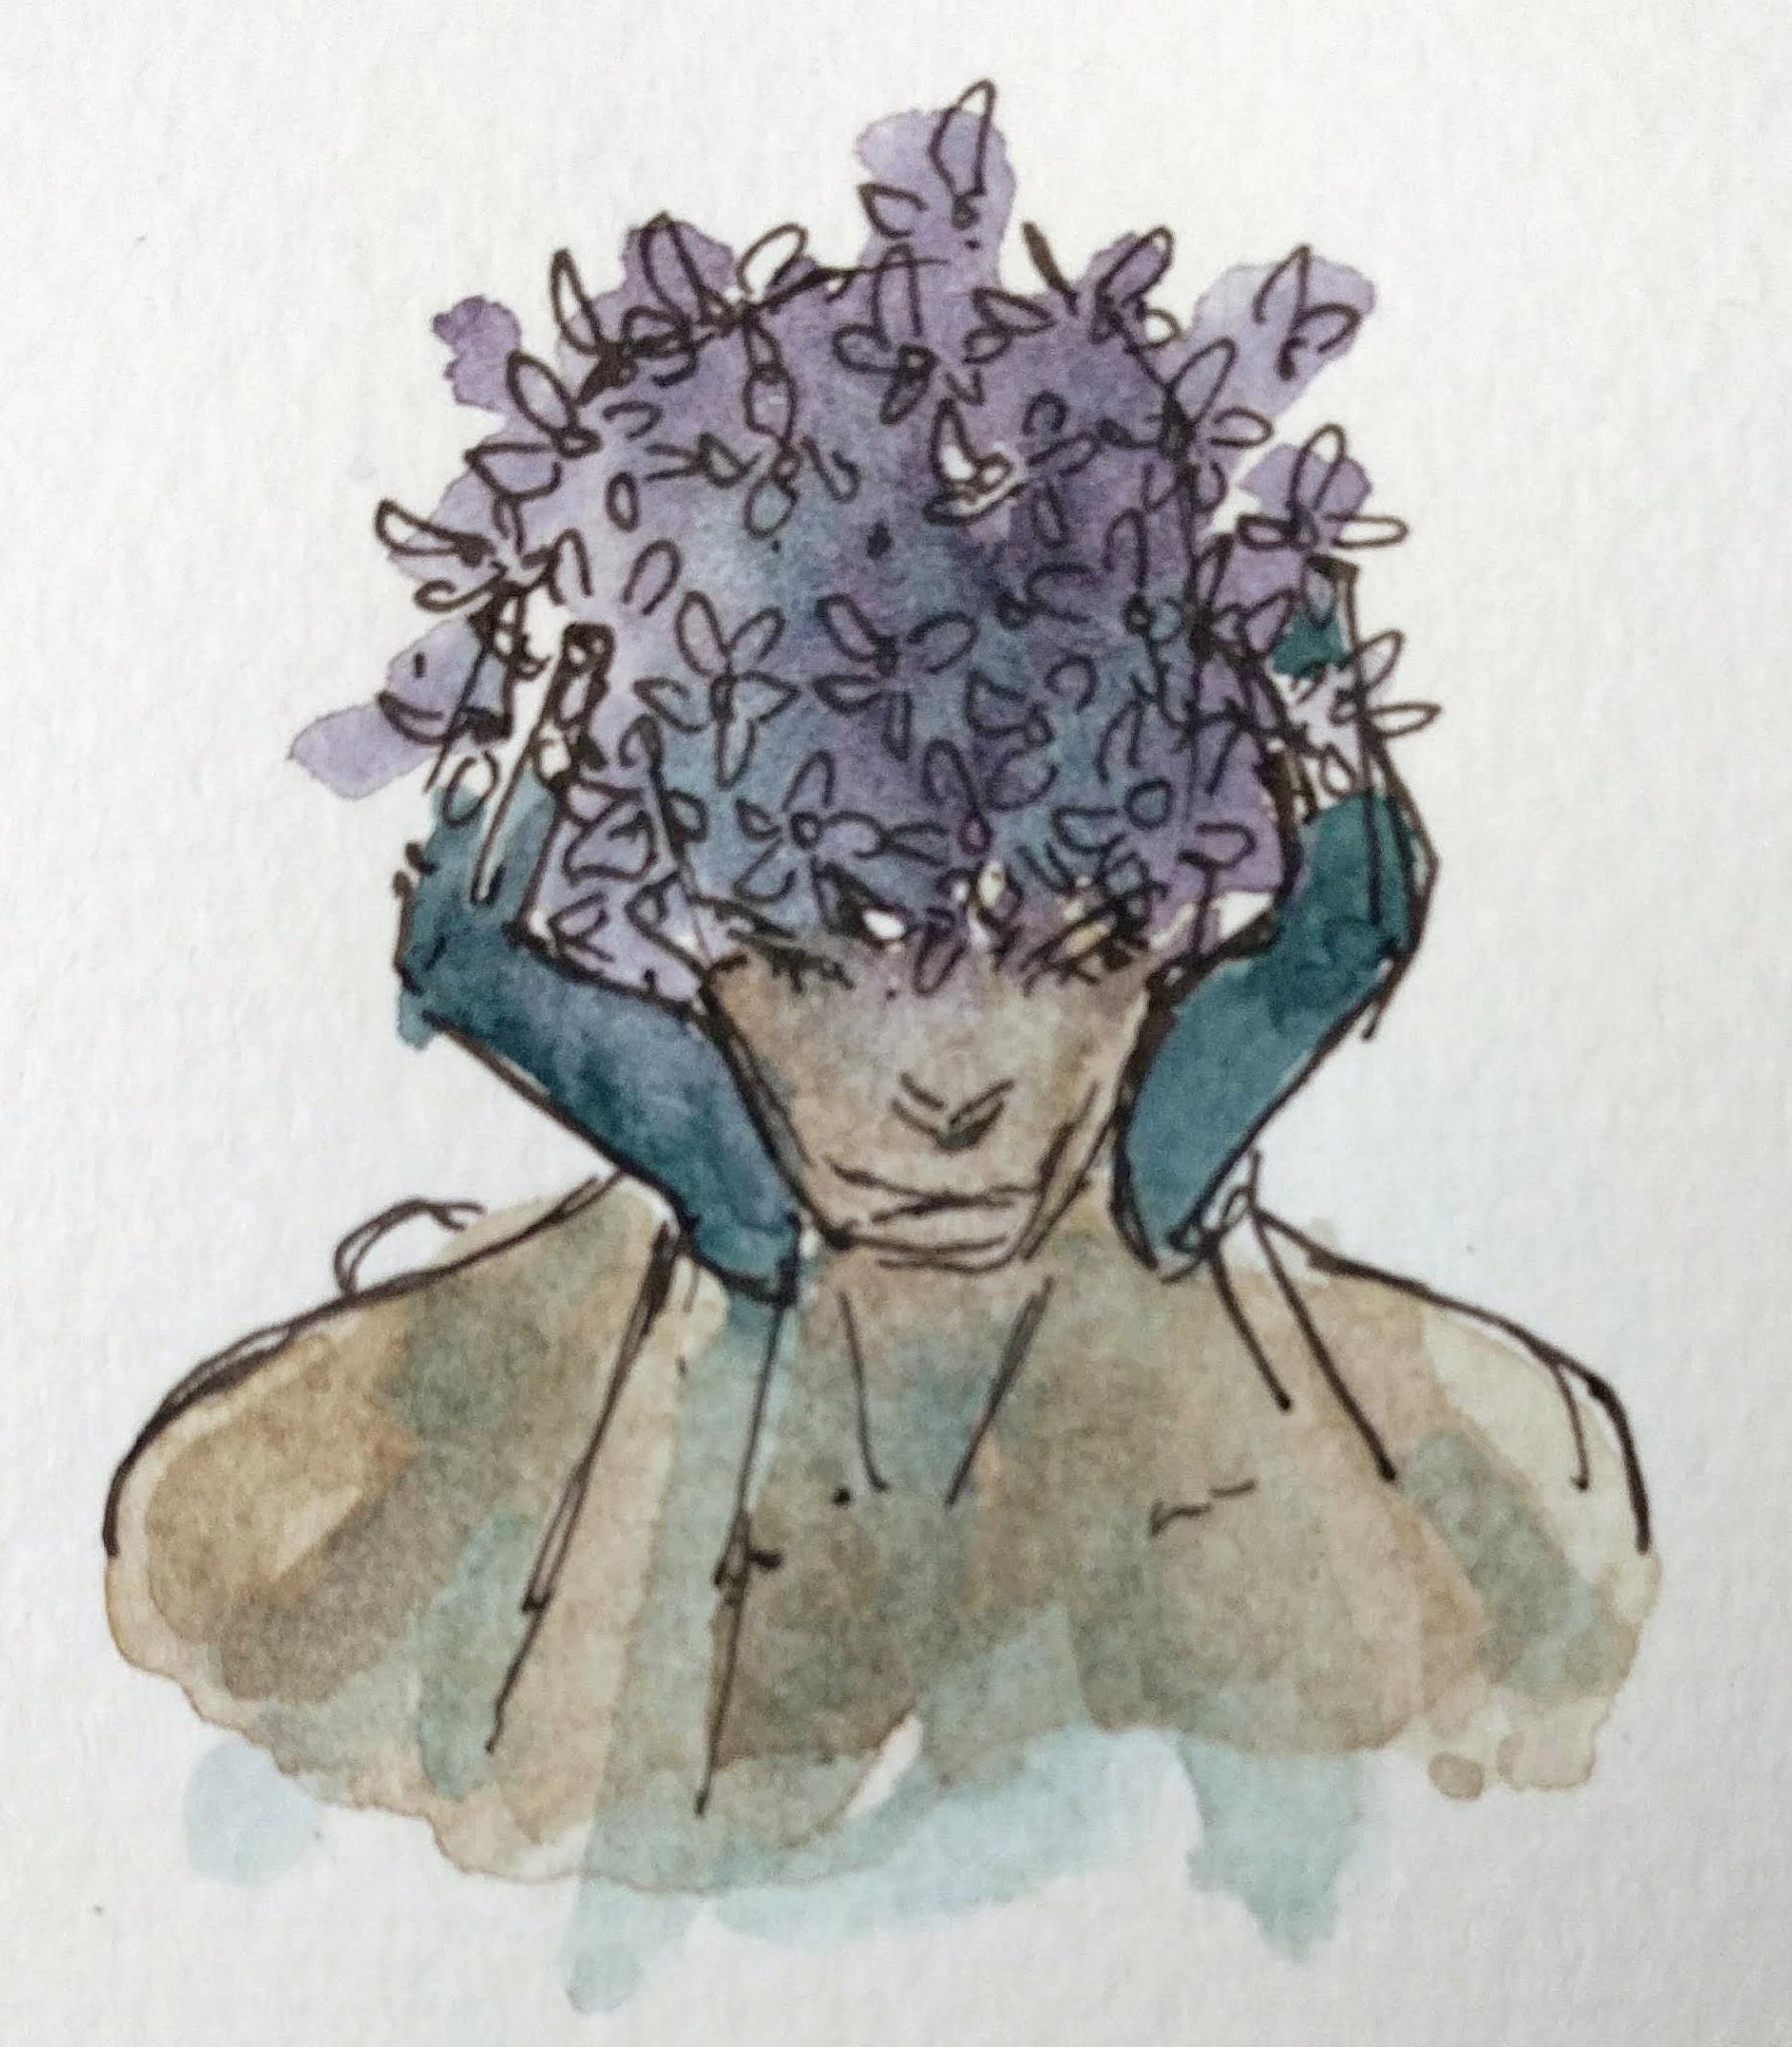 A person with flowers growing over their hair, holding gloved hands to their ears.